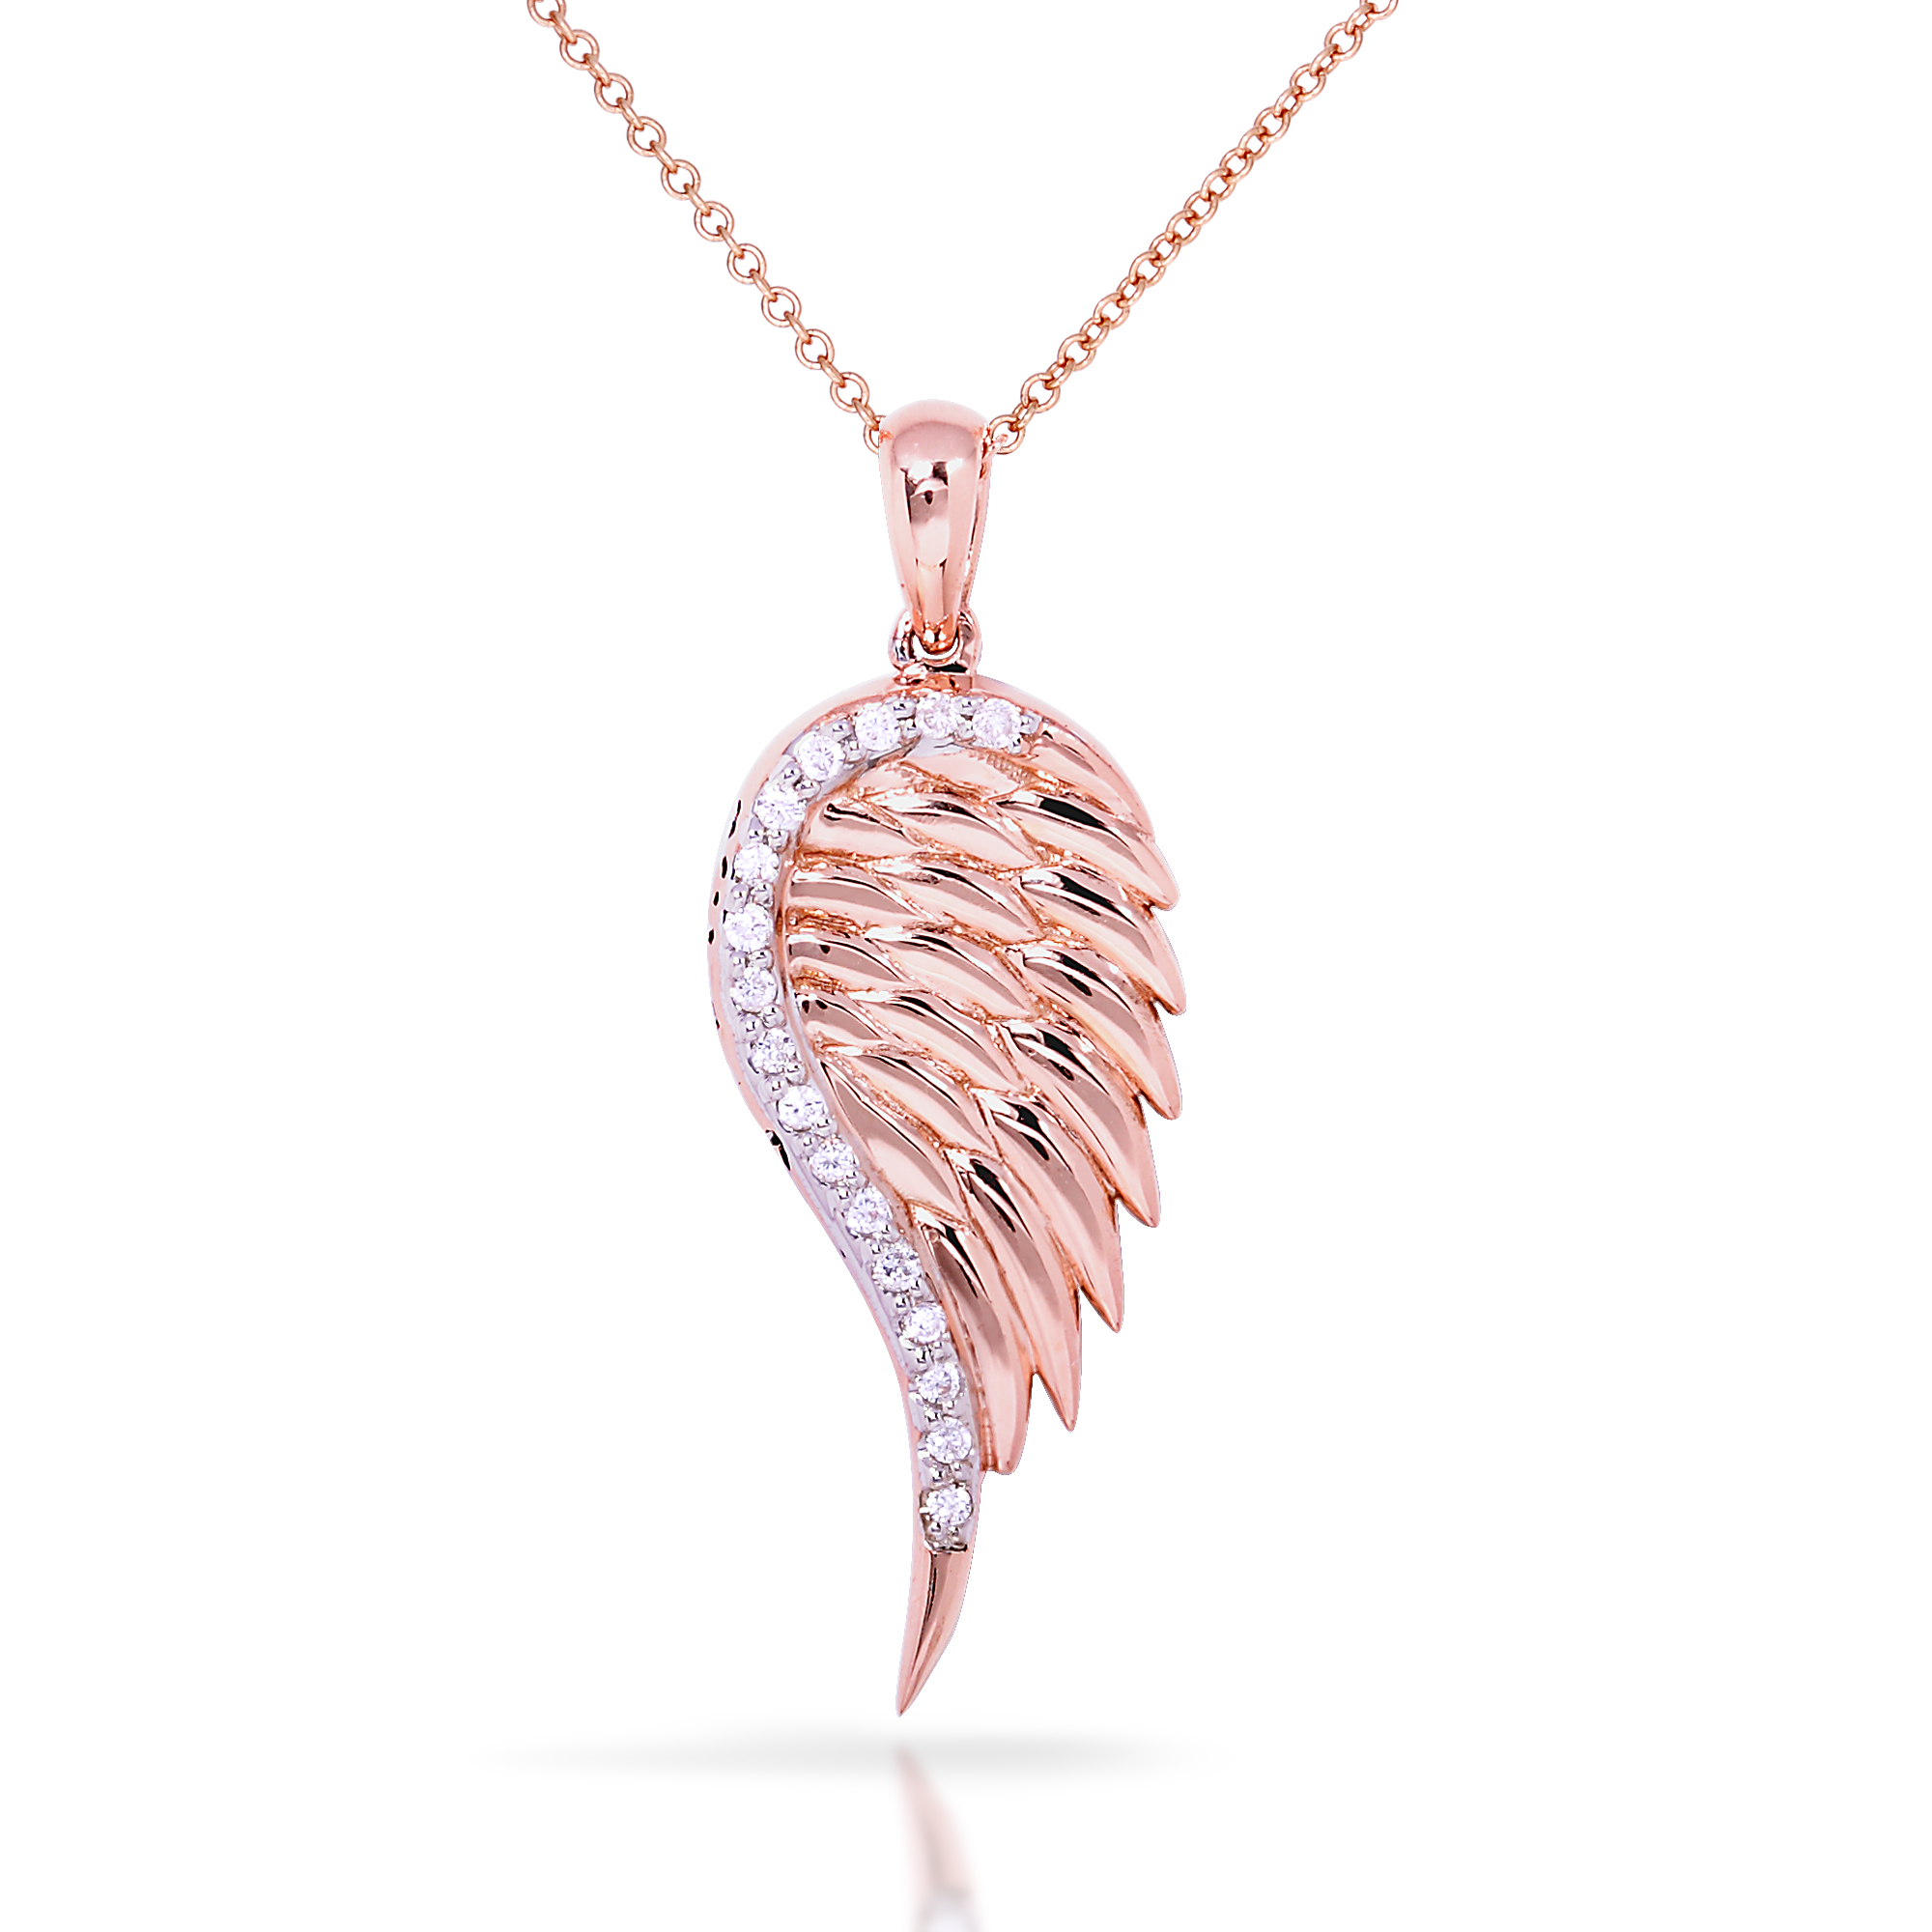 ... 18k Rose Gold Over Silver Morganite White Zircon Angel Wing Necklace